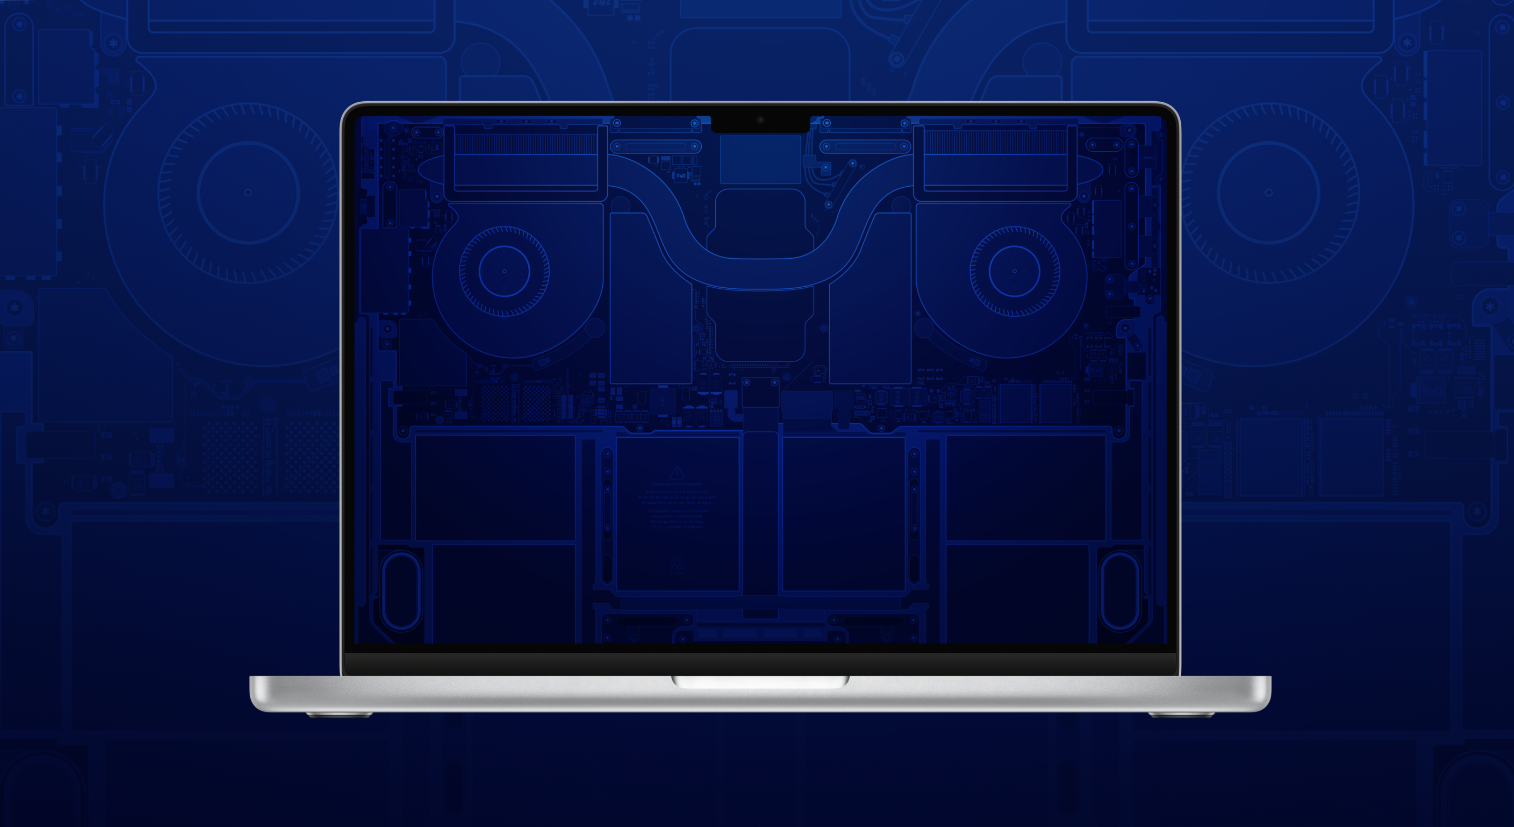 Download the new 2022 MacBook Air wallpapers right here - 9to5Mac